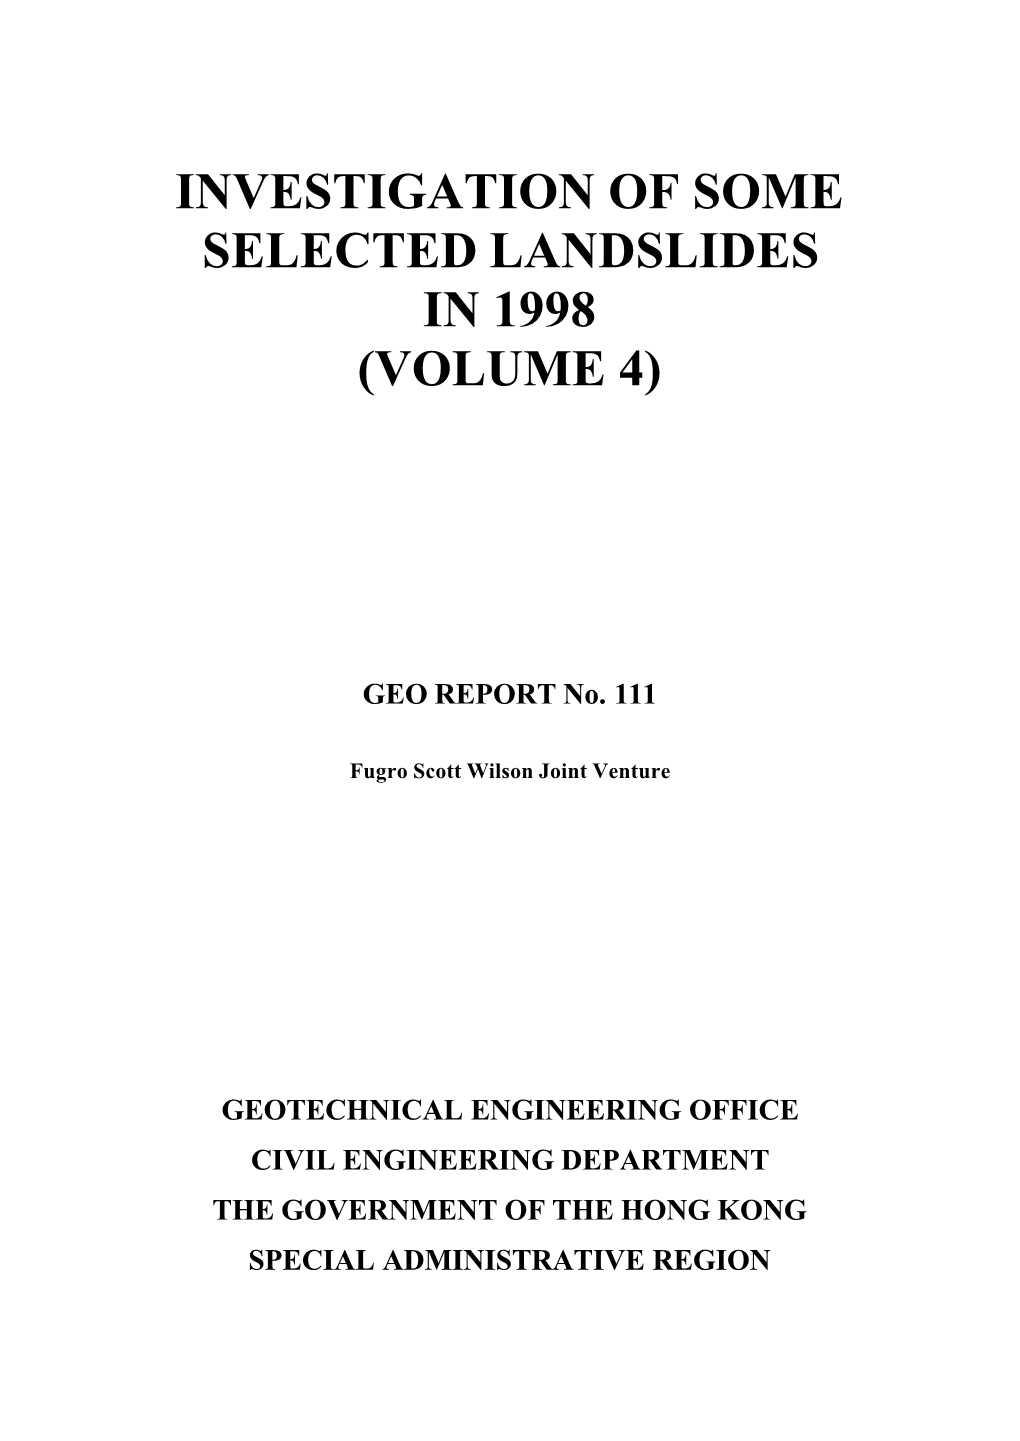 Section 1 : Detailed Study of the Landslide at the Hong Kong Stadium on 24 May 1998